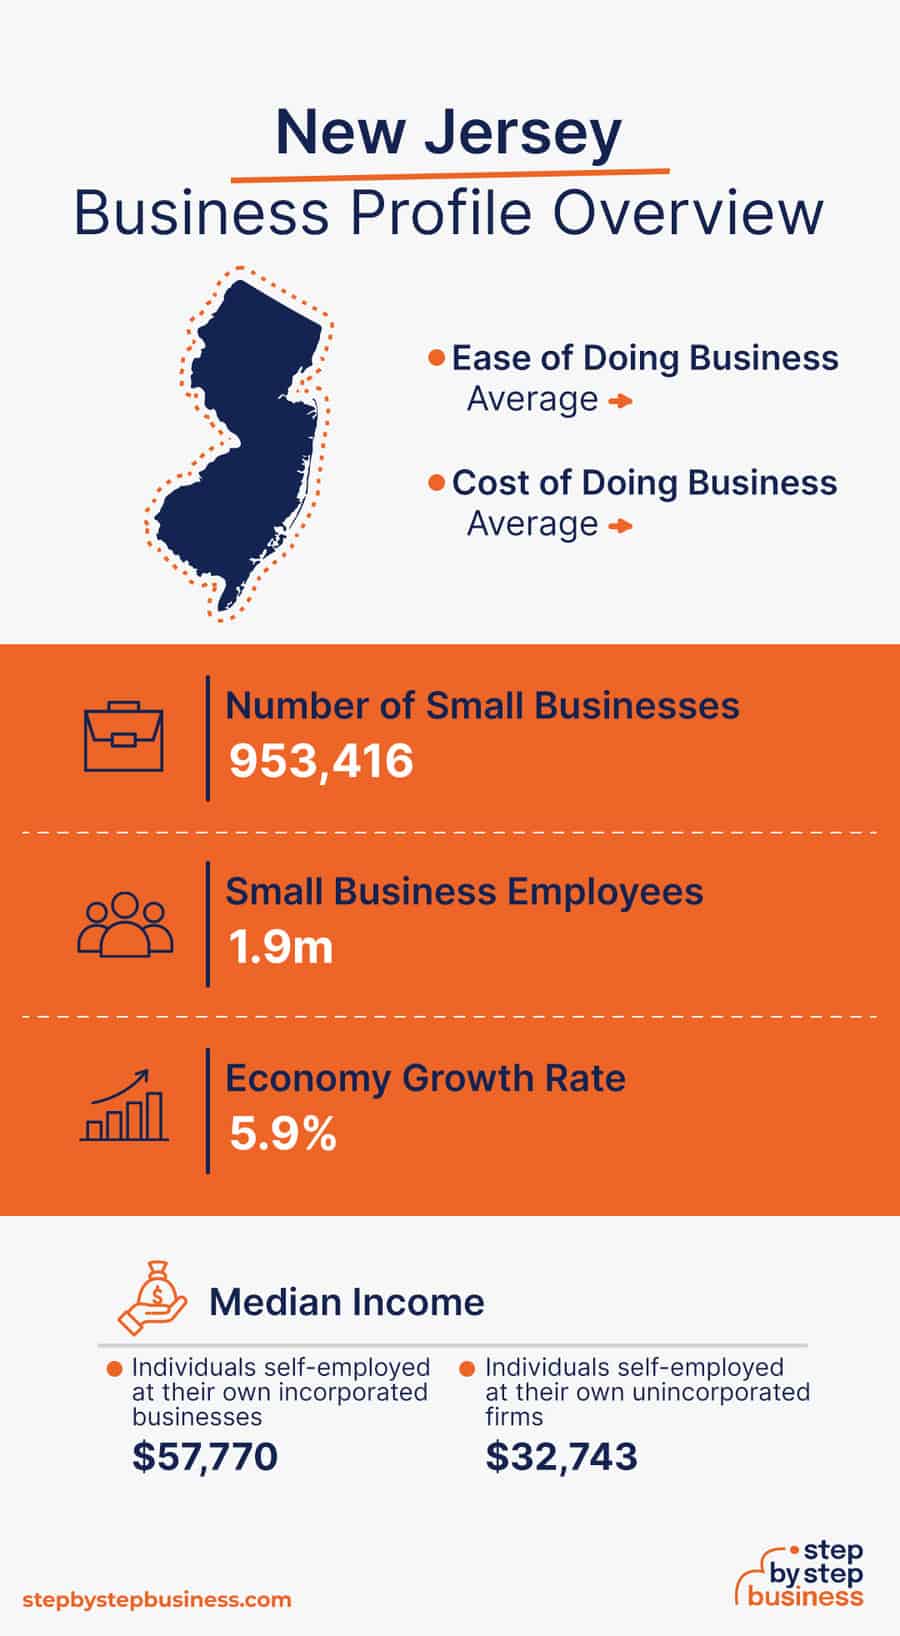 New Jersey Business Profile Overview